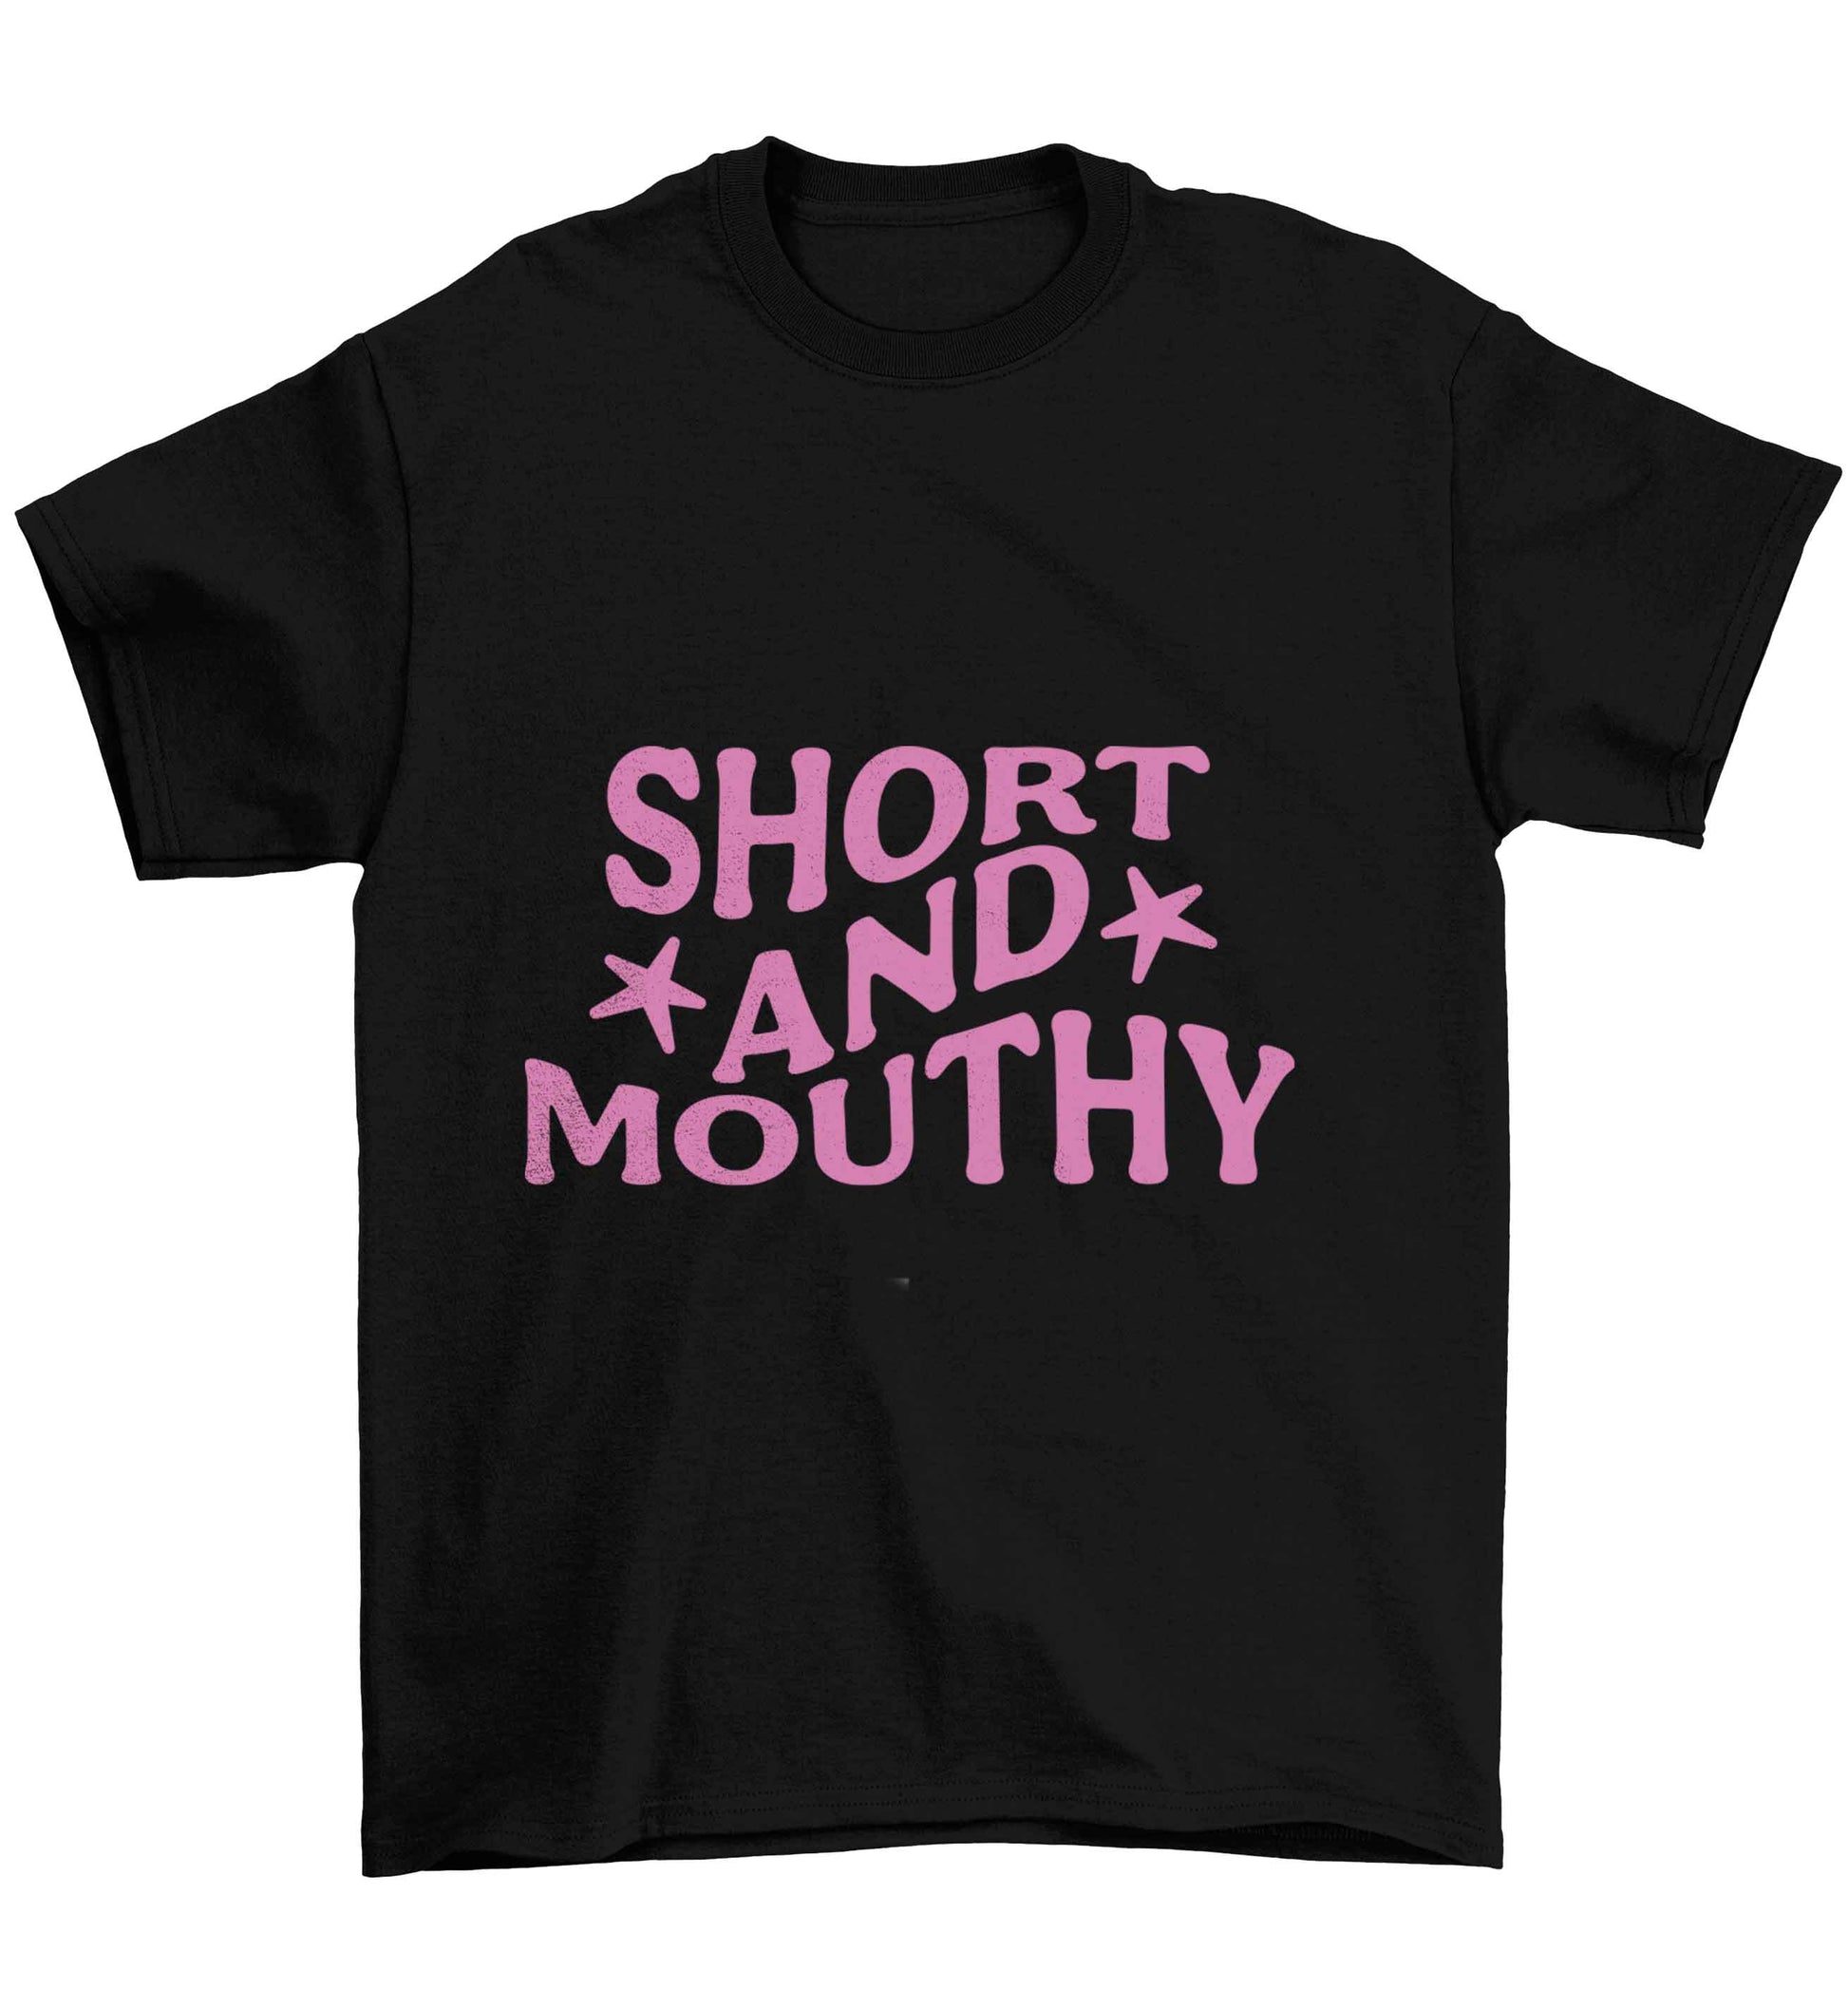 Short and mouthy Children's black Tshirt 12-13 Years